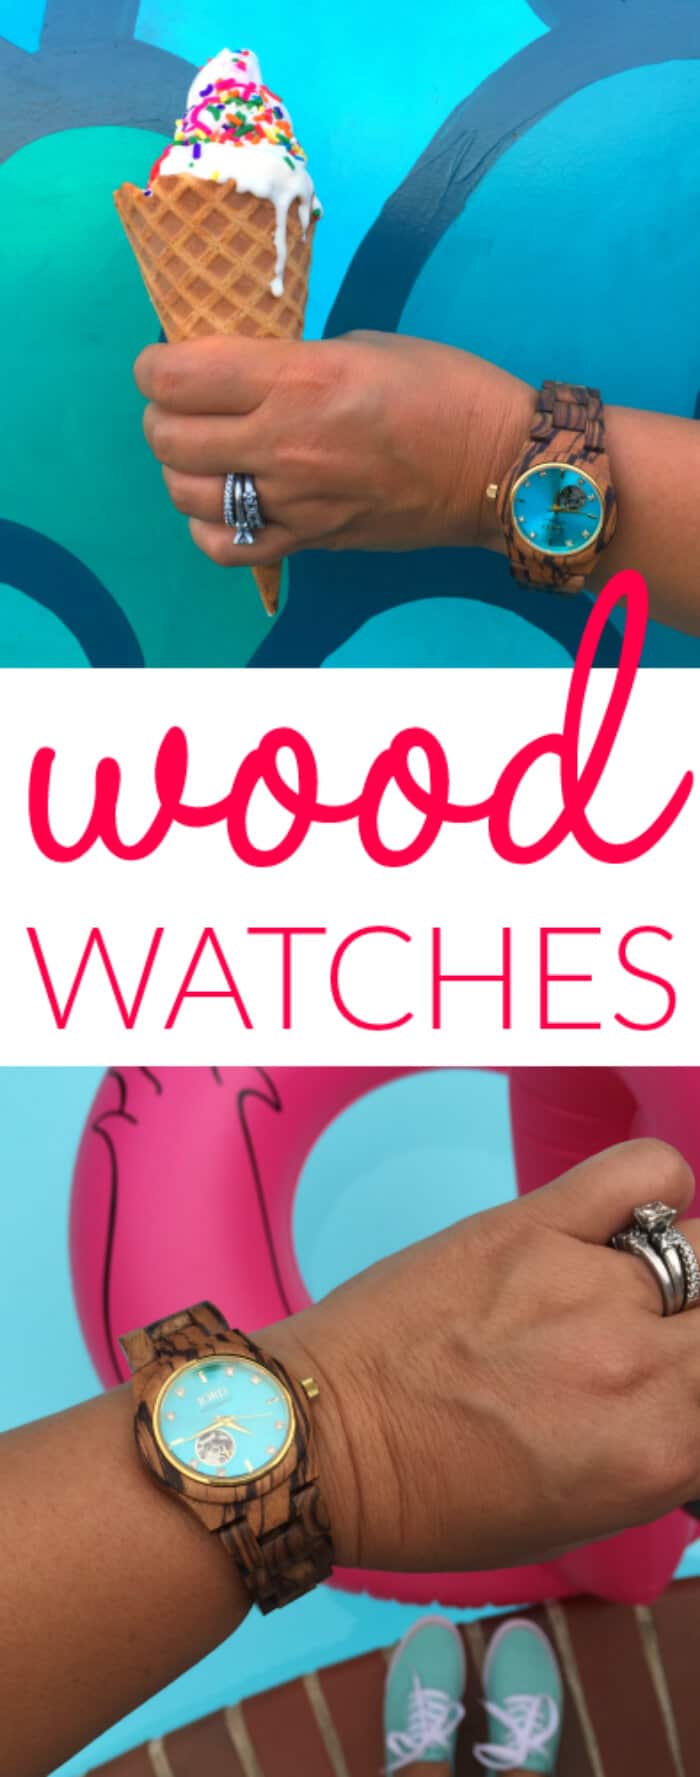 Womens Wooden Watches | Wood Watches with Color | Turquoise Face Watch | www.madewithhappy.com